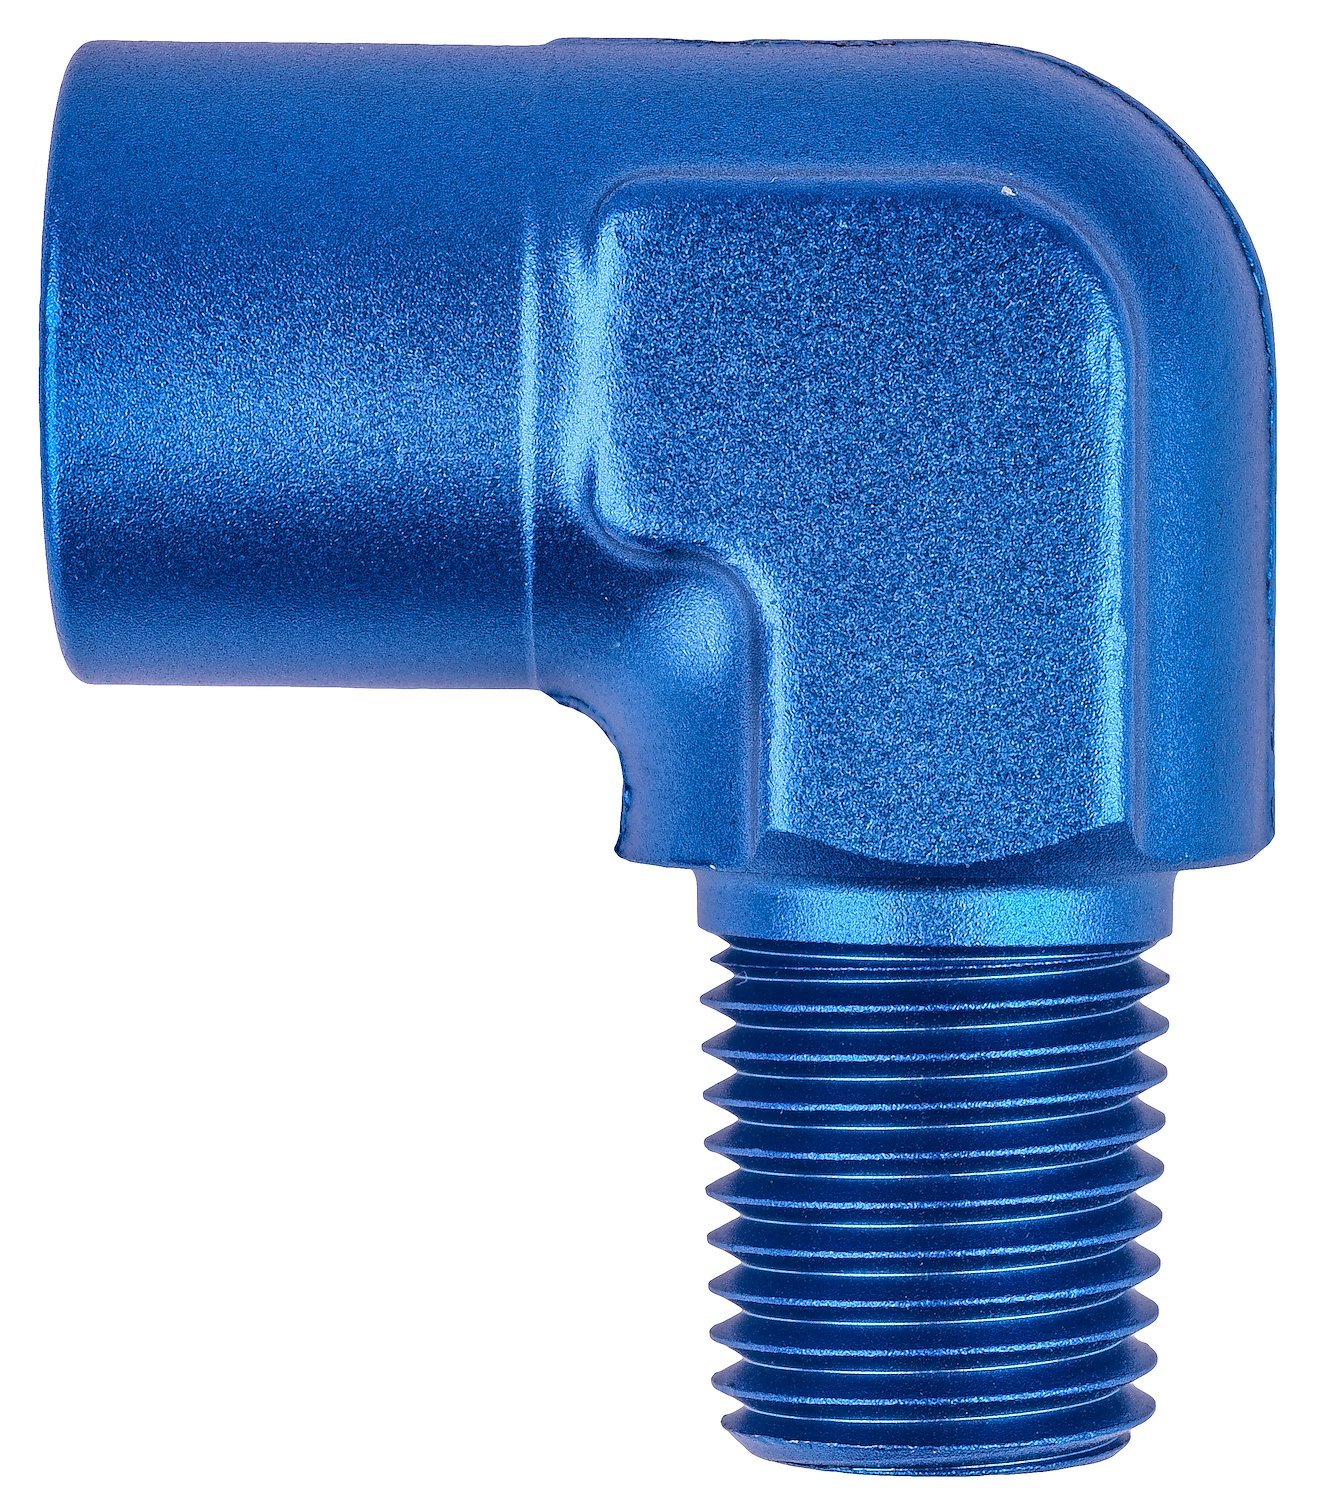 NPT to NPT Adapter Fitting, 90 degree [1/4 in. NPT Male to 1/4 in. NPT Female, Blue]